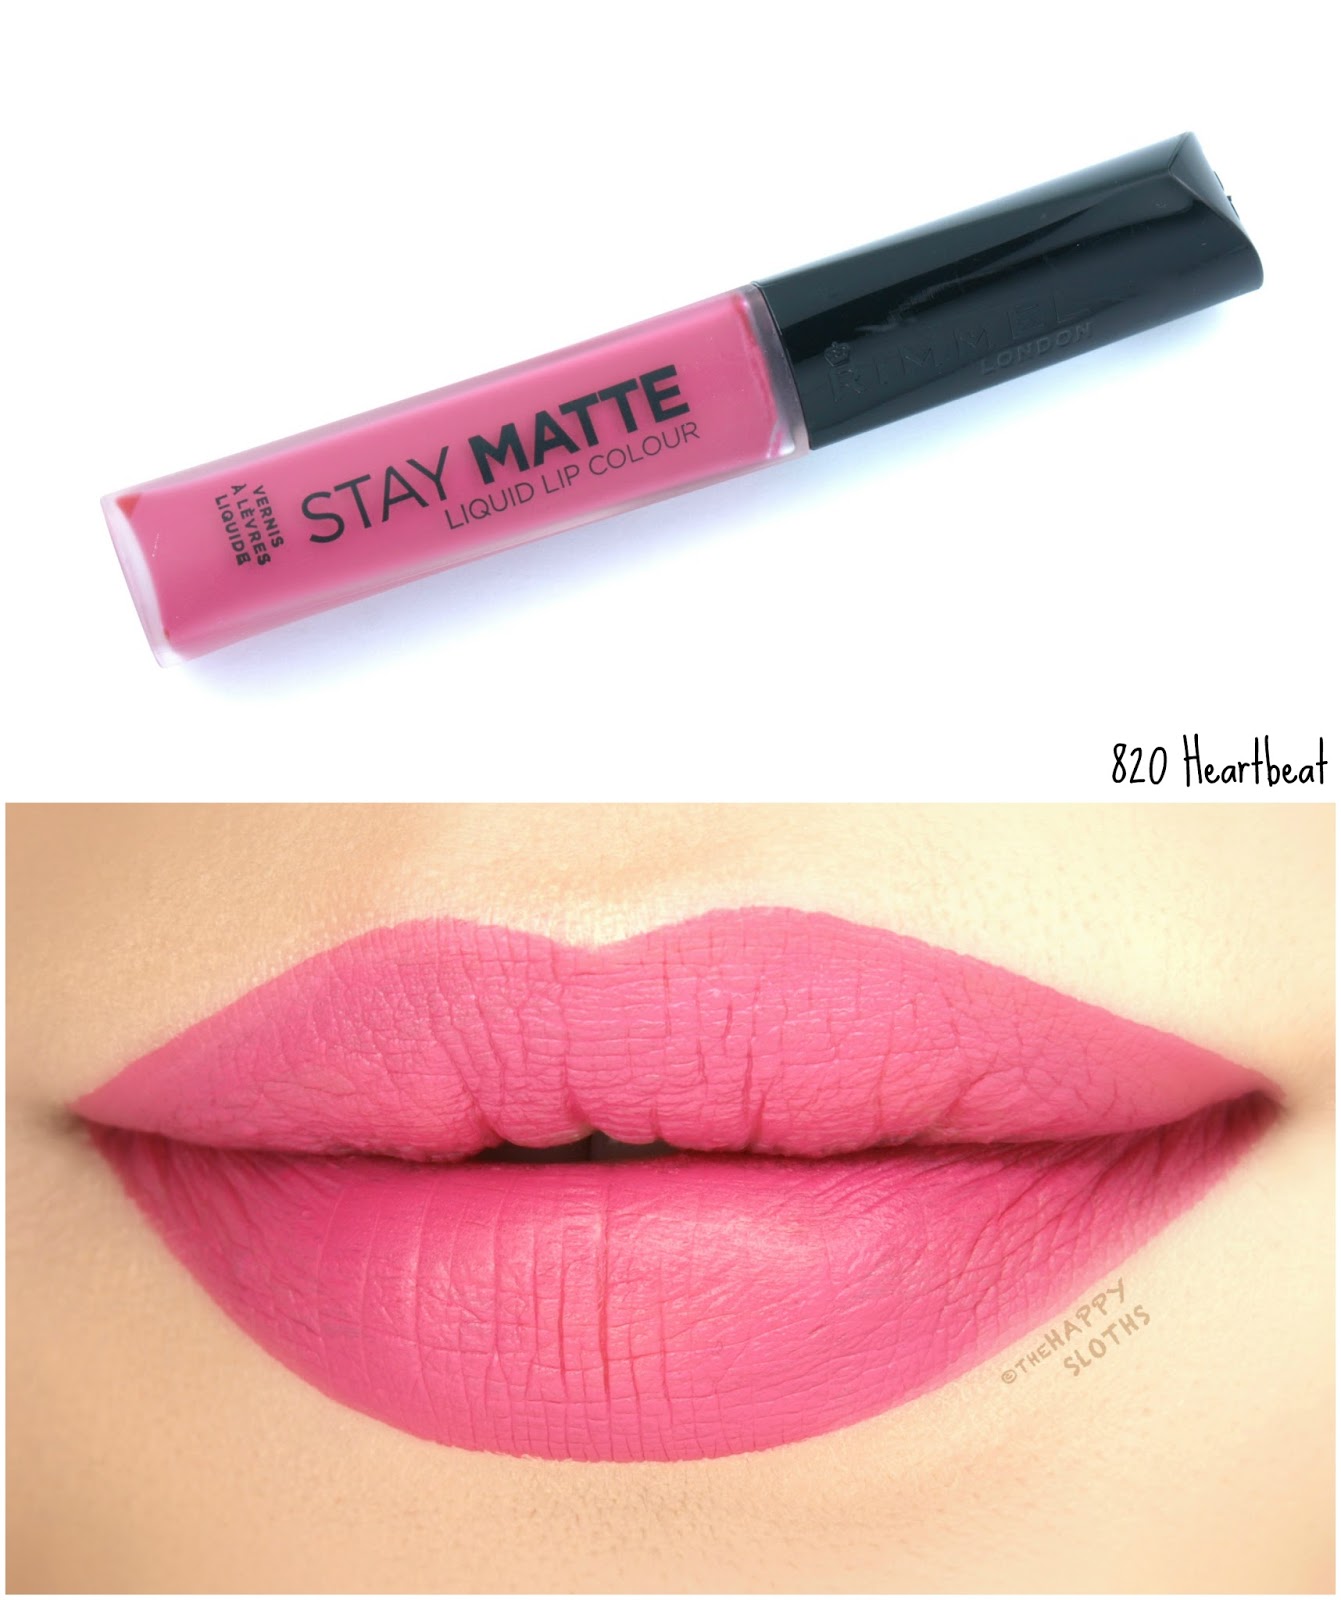 Rimmel London Stay Matte Liquid Lip Colour | 820 Heartbeat: Review and Swatches